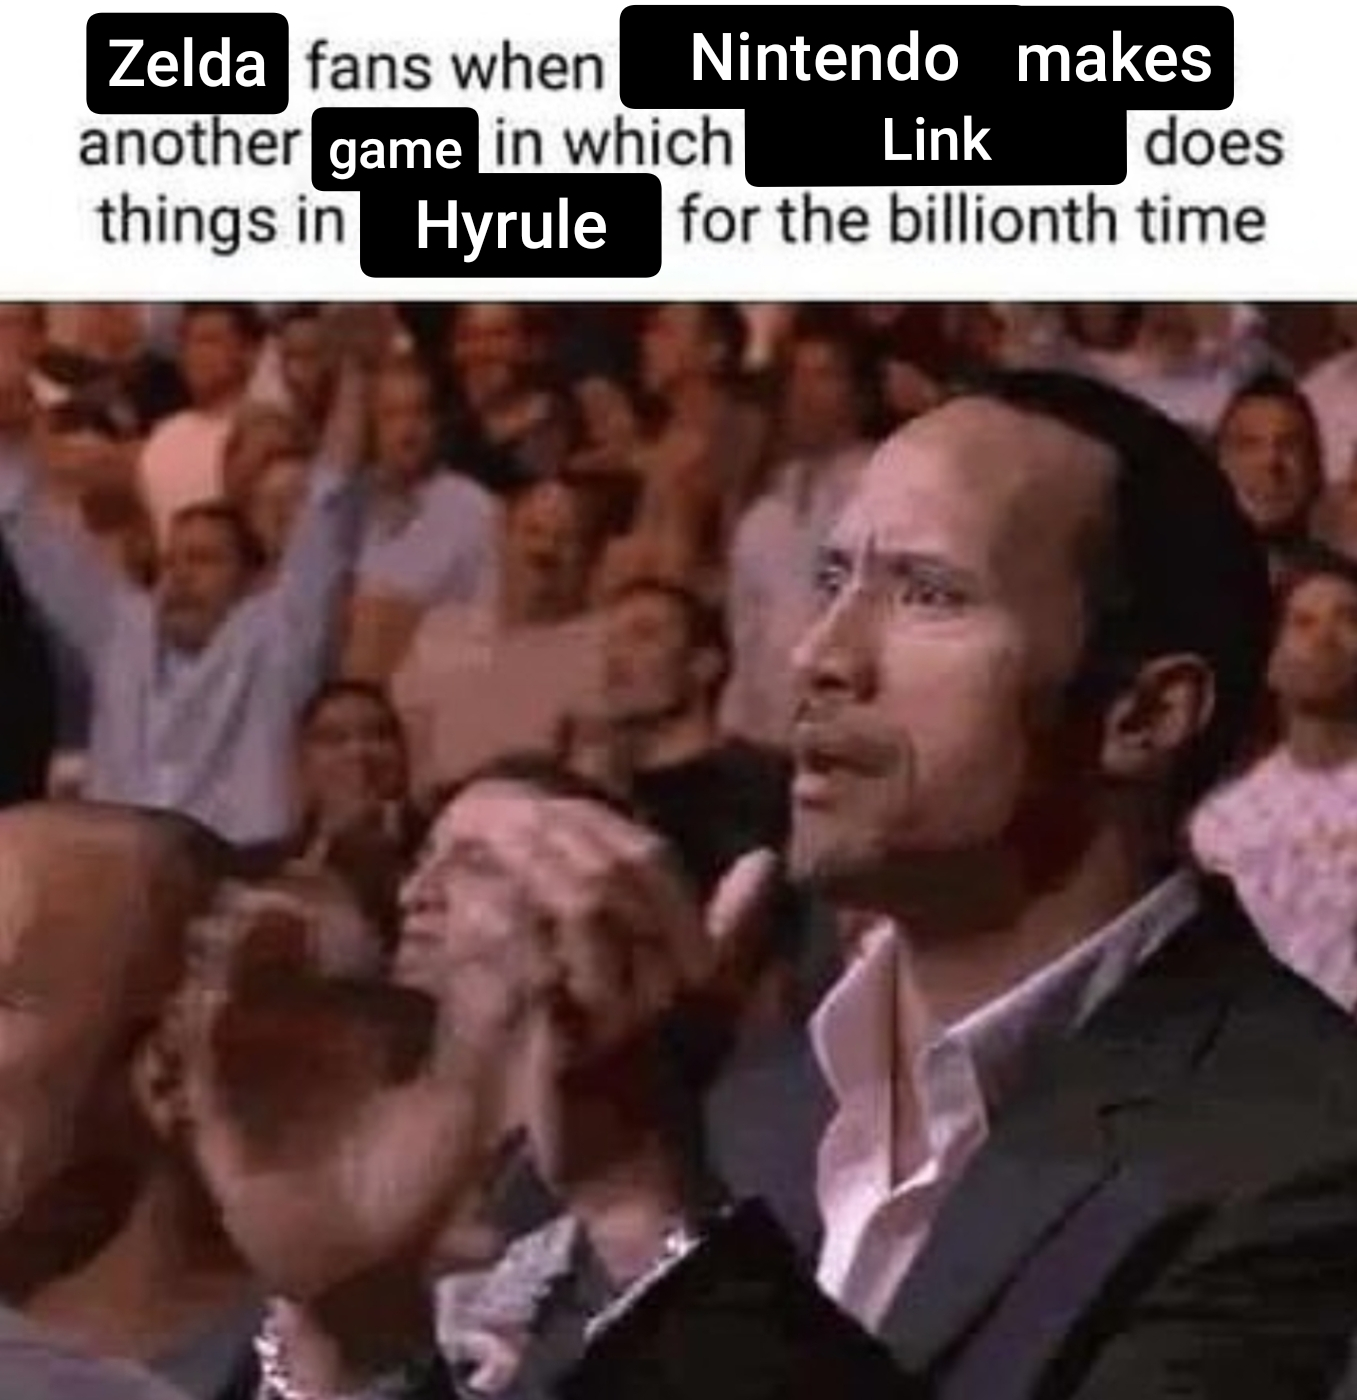 gaming memes - photo caption - Zelda fans when Nintendo makes Link does another game in which things in Hyrule for the billionth time